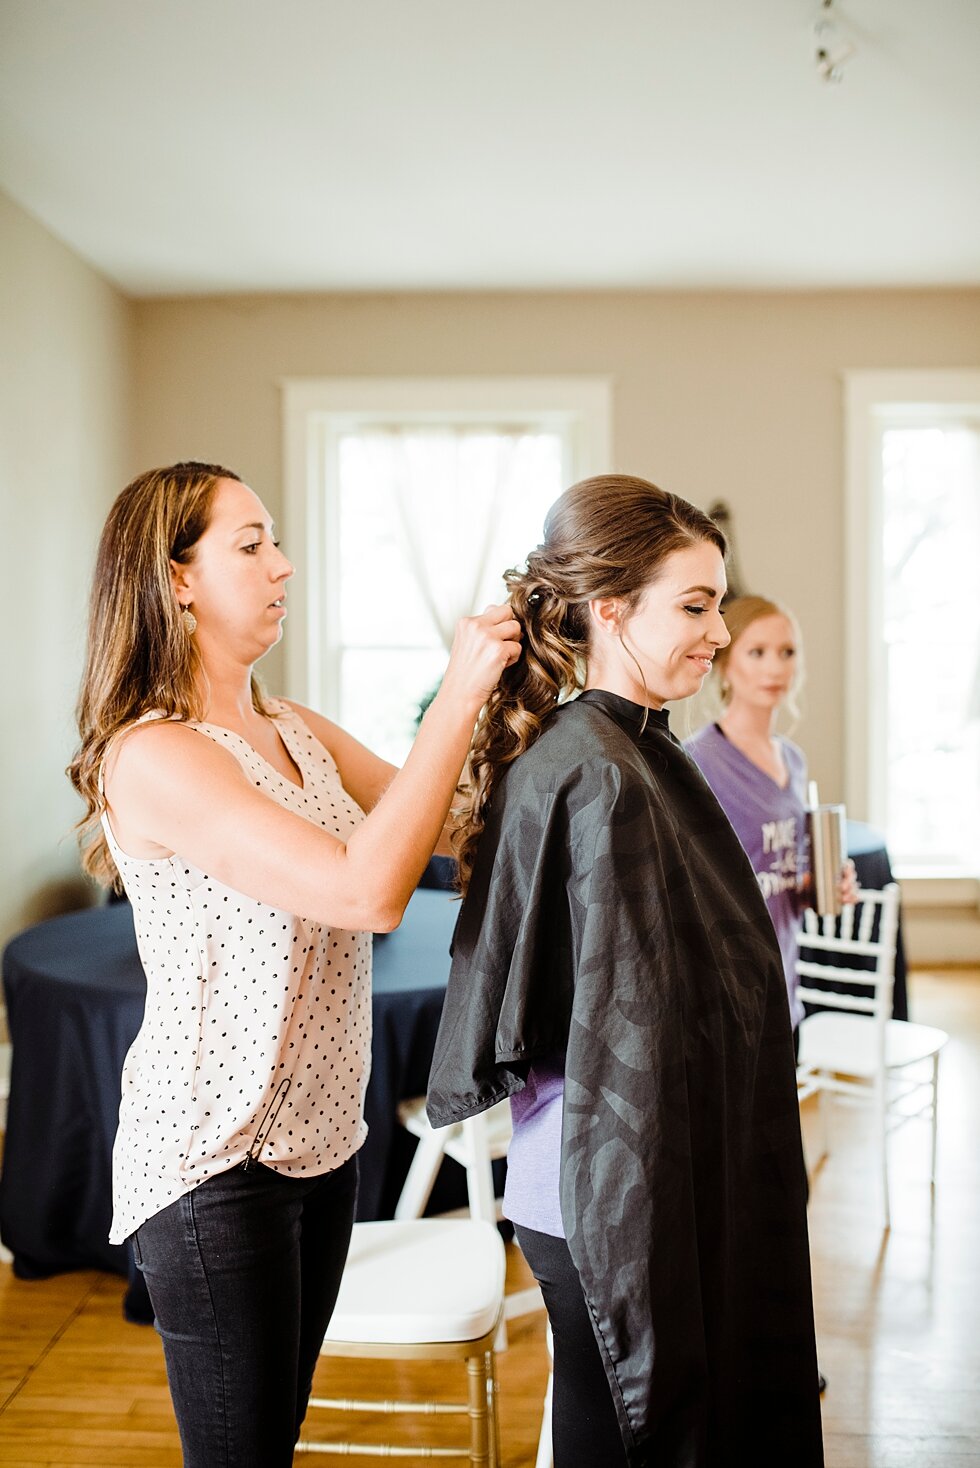  Bride sitting while hair is being done hours before she is set to walk down the aisle with her love on her wedding day. wedding ceremony details stunning photography married midwest louisville kentucky #weddingphoto #love #justmarried #midwestphotog